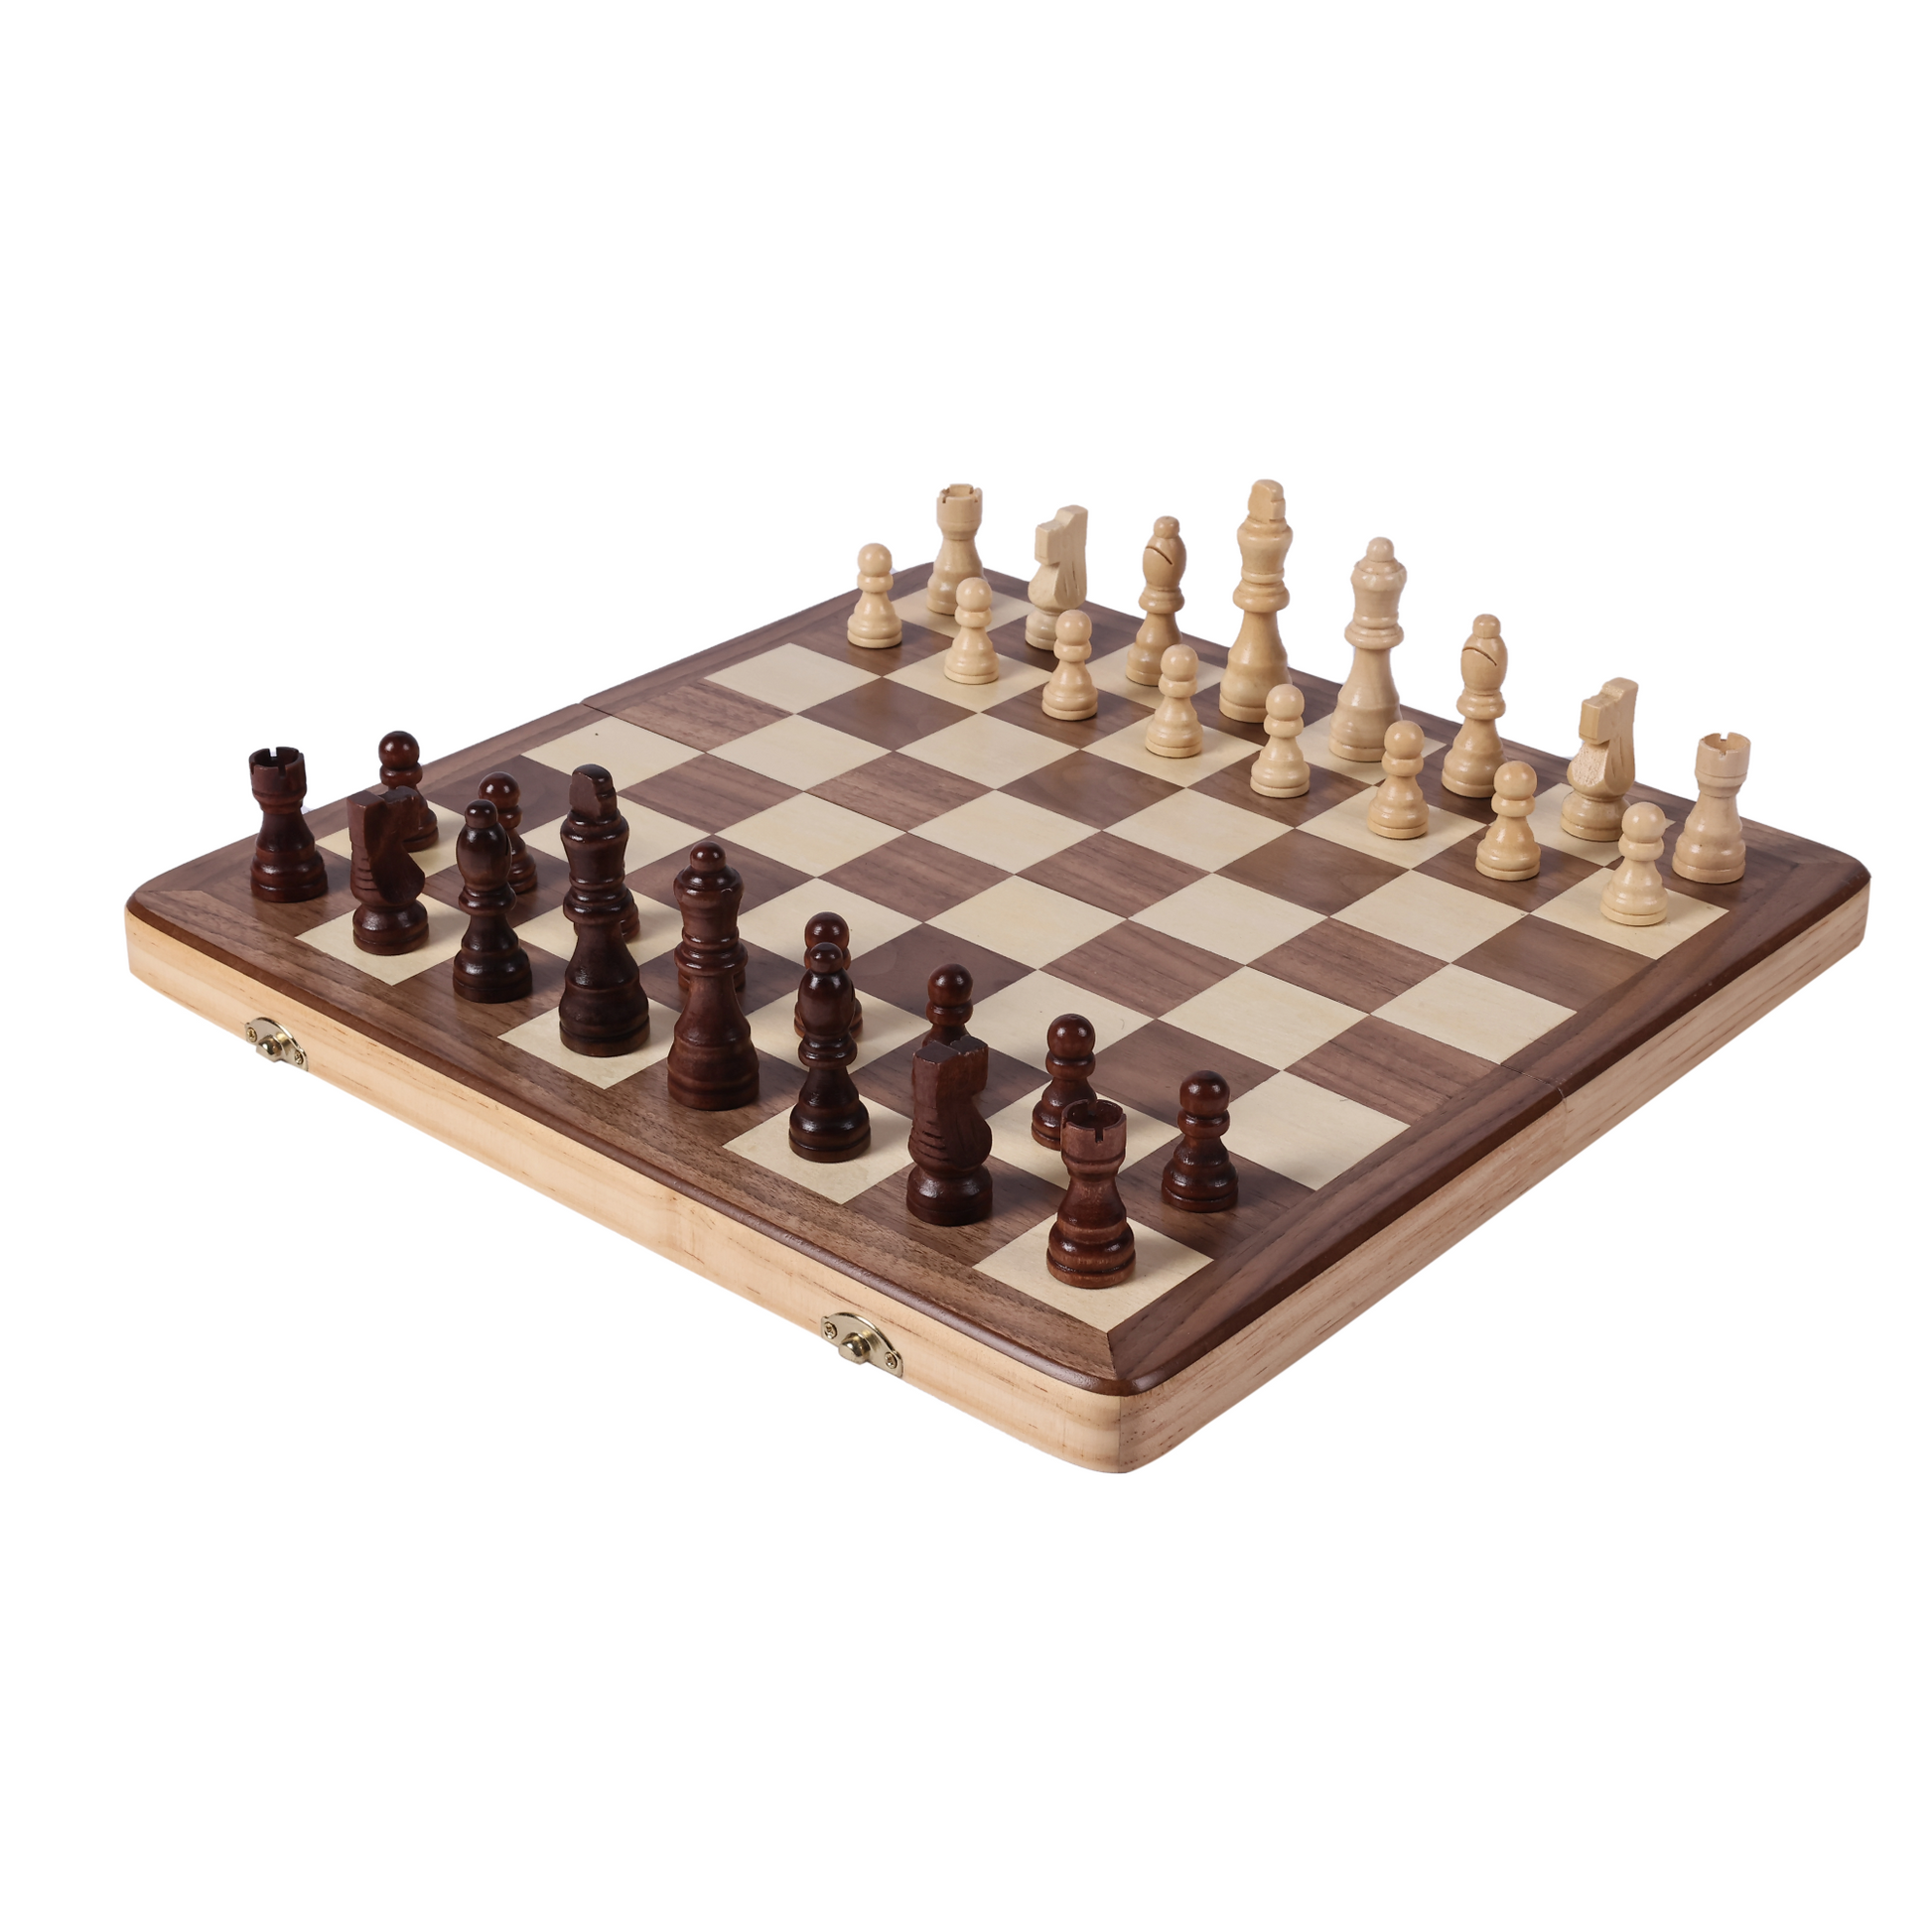 Buy First Chess Openings in Bulk